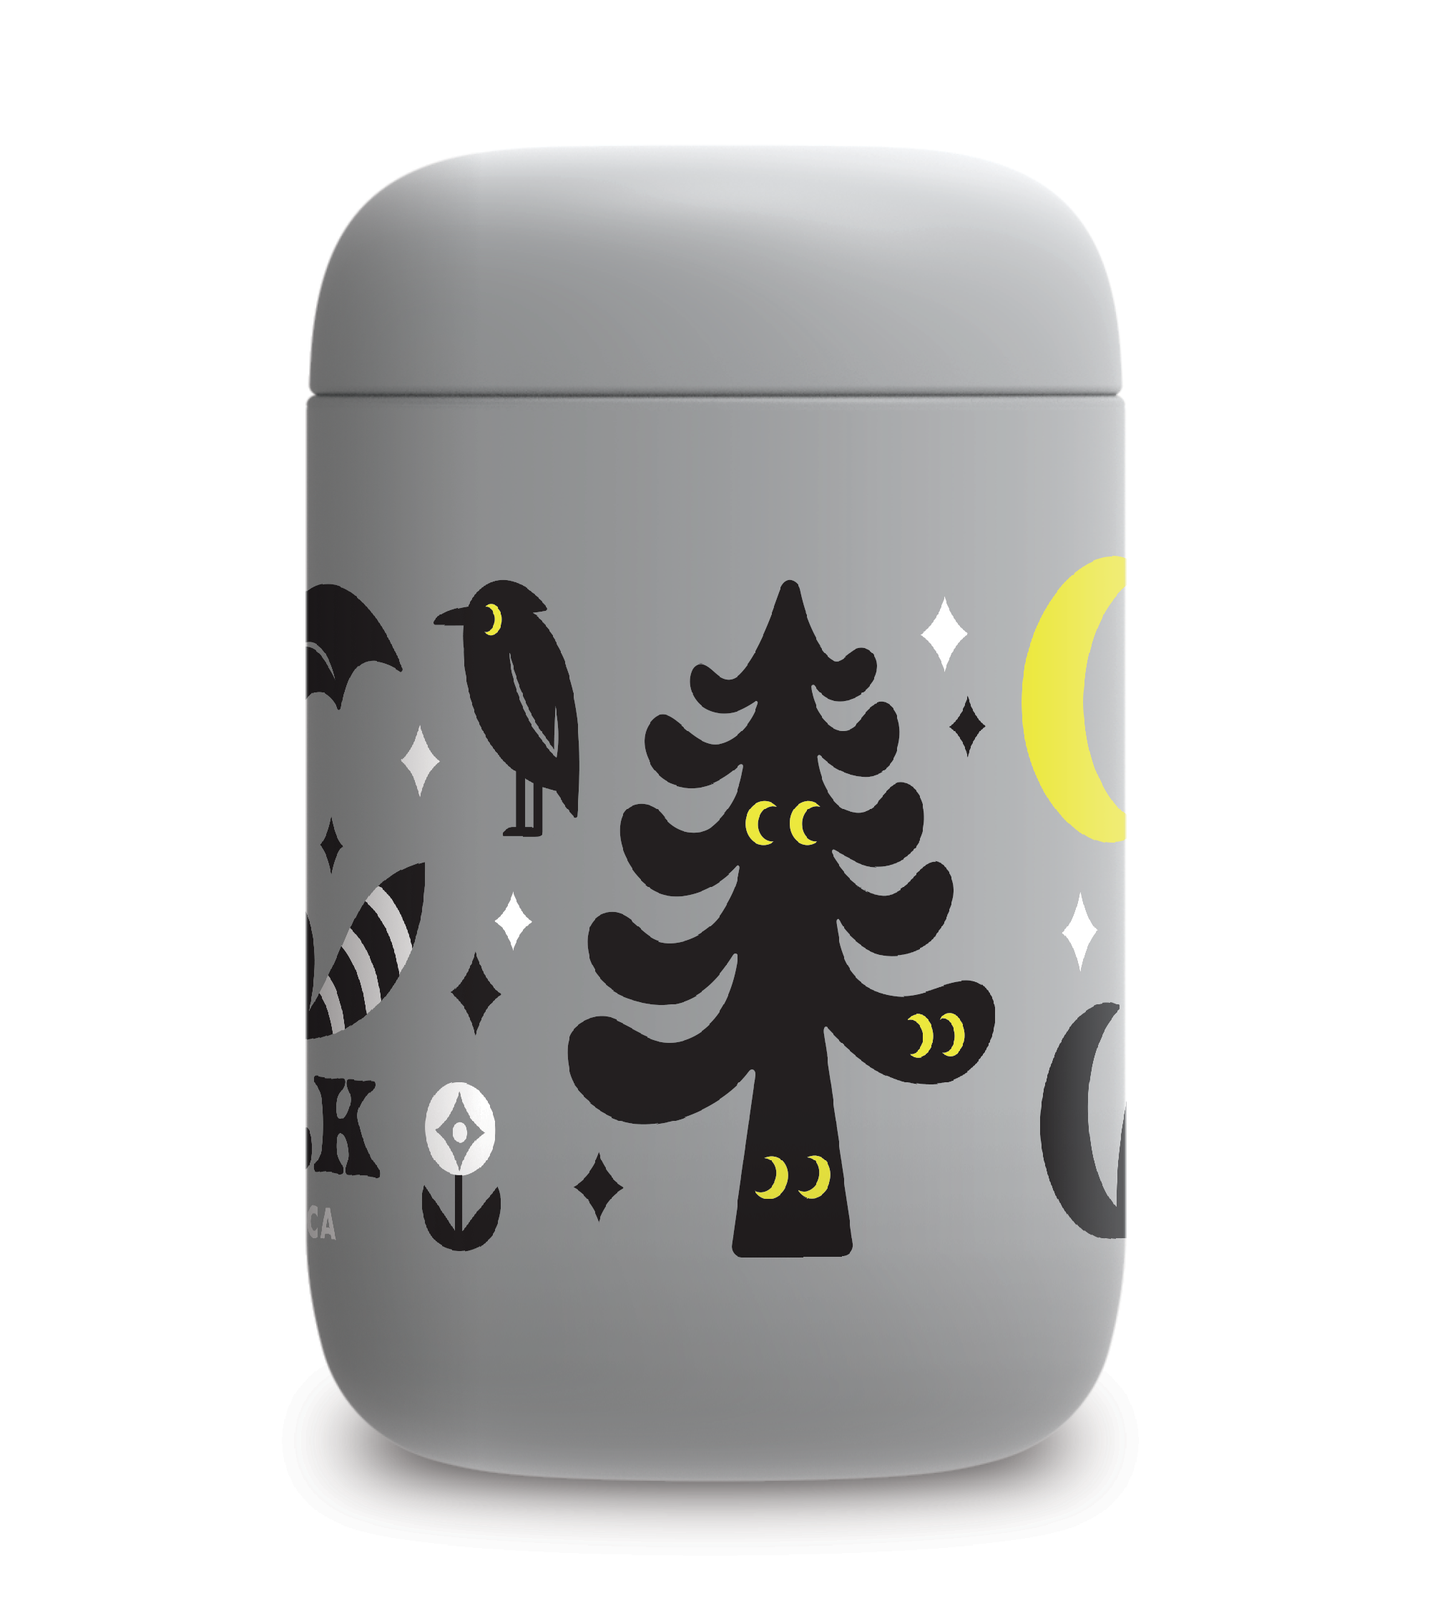 Parks After Dark mug by the Golden Gate National Parks Conservancy made in partnership with San Francisco company Fellow